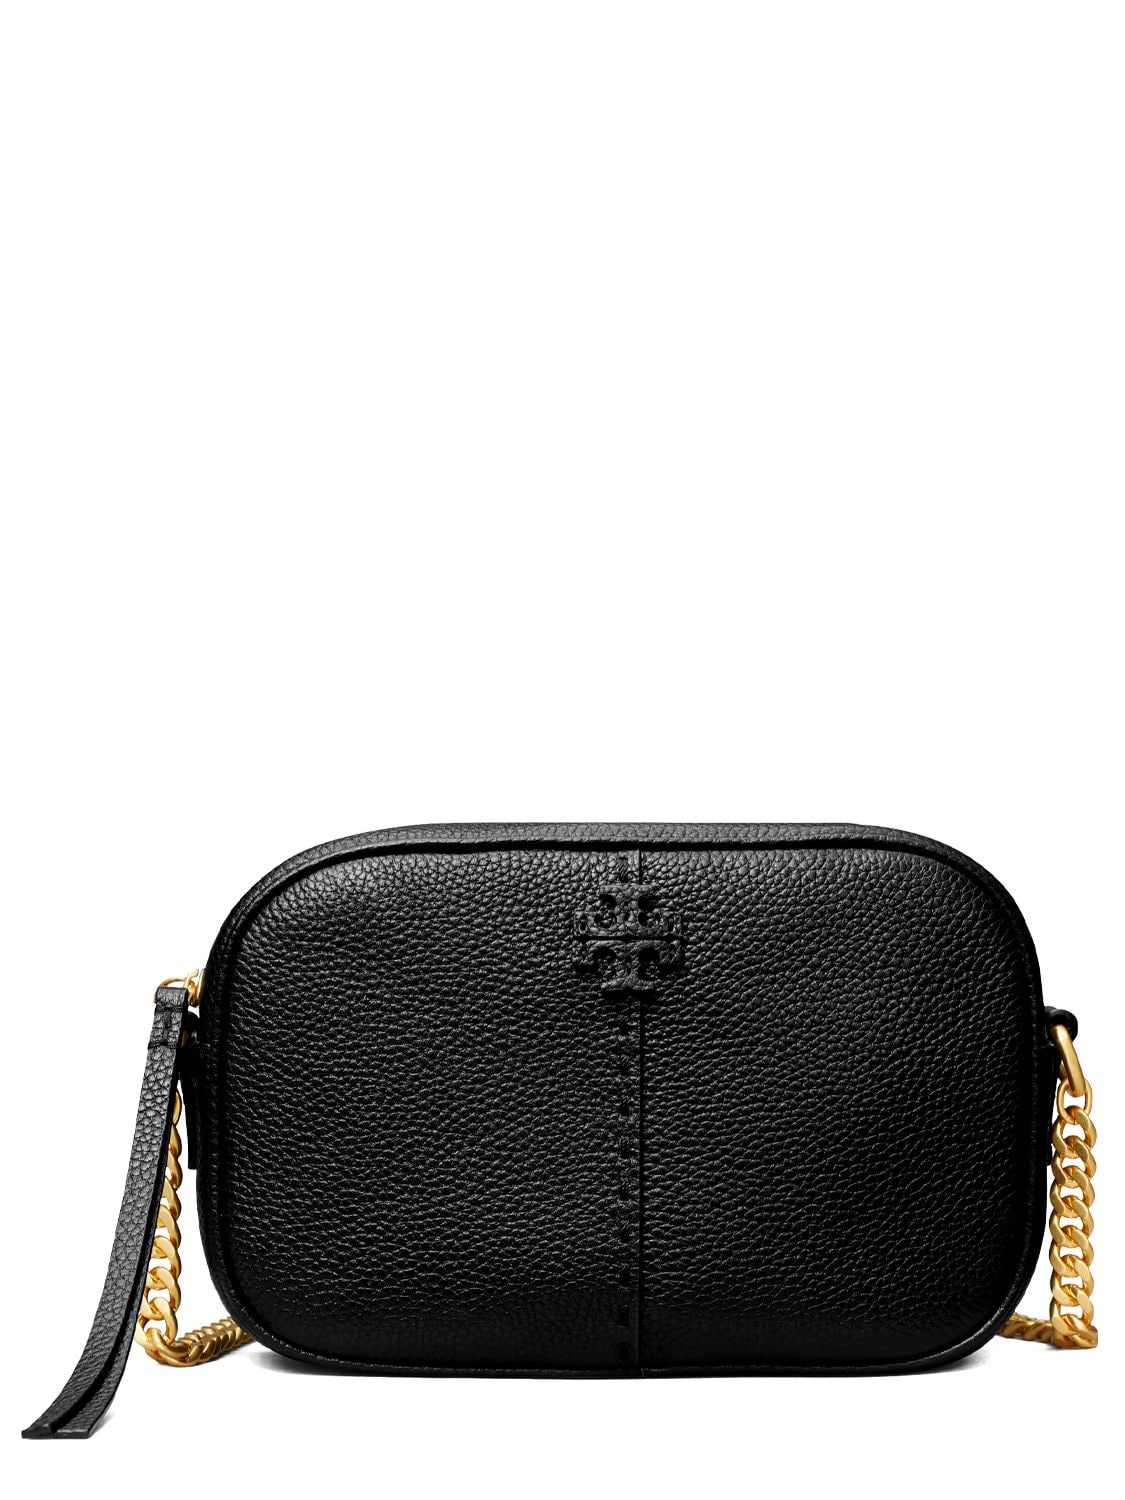 Tory Burch Mcgraw Leather Camera Shoulder Bag In Black